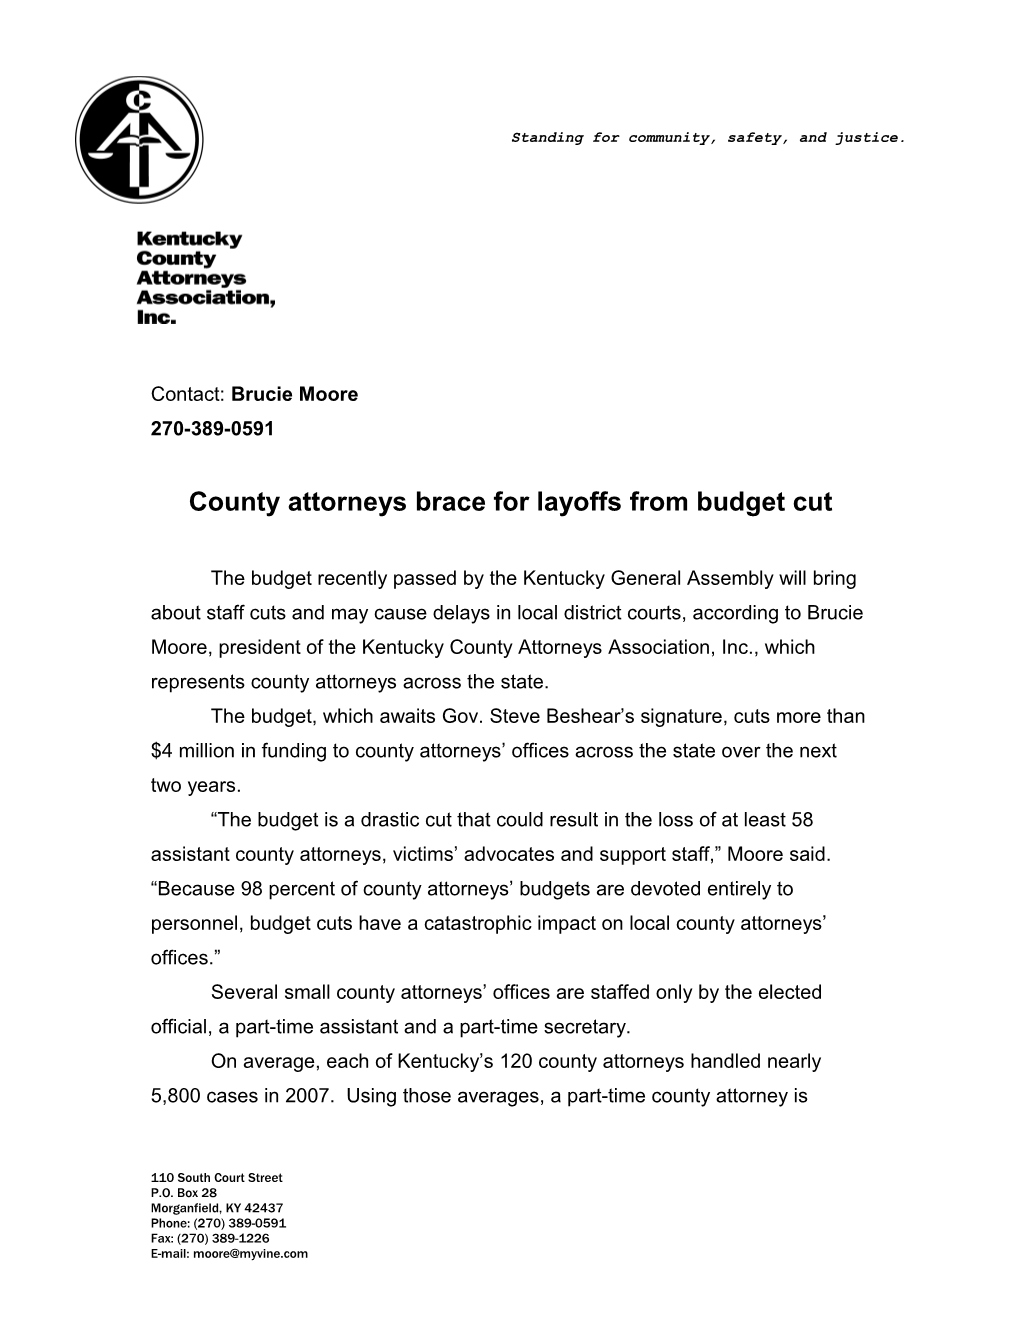 County Attorneys Brace for Layoffs from Budget Cut